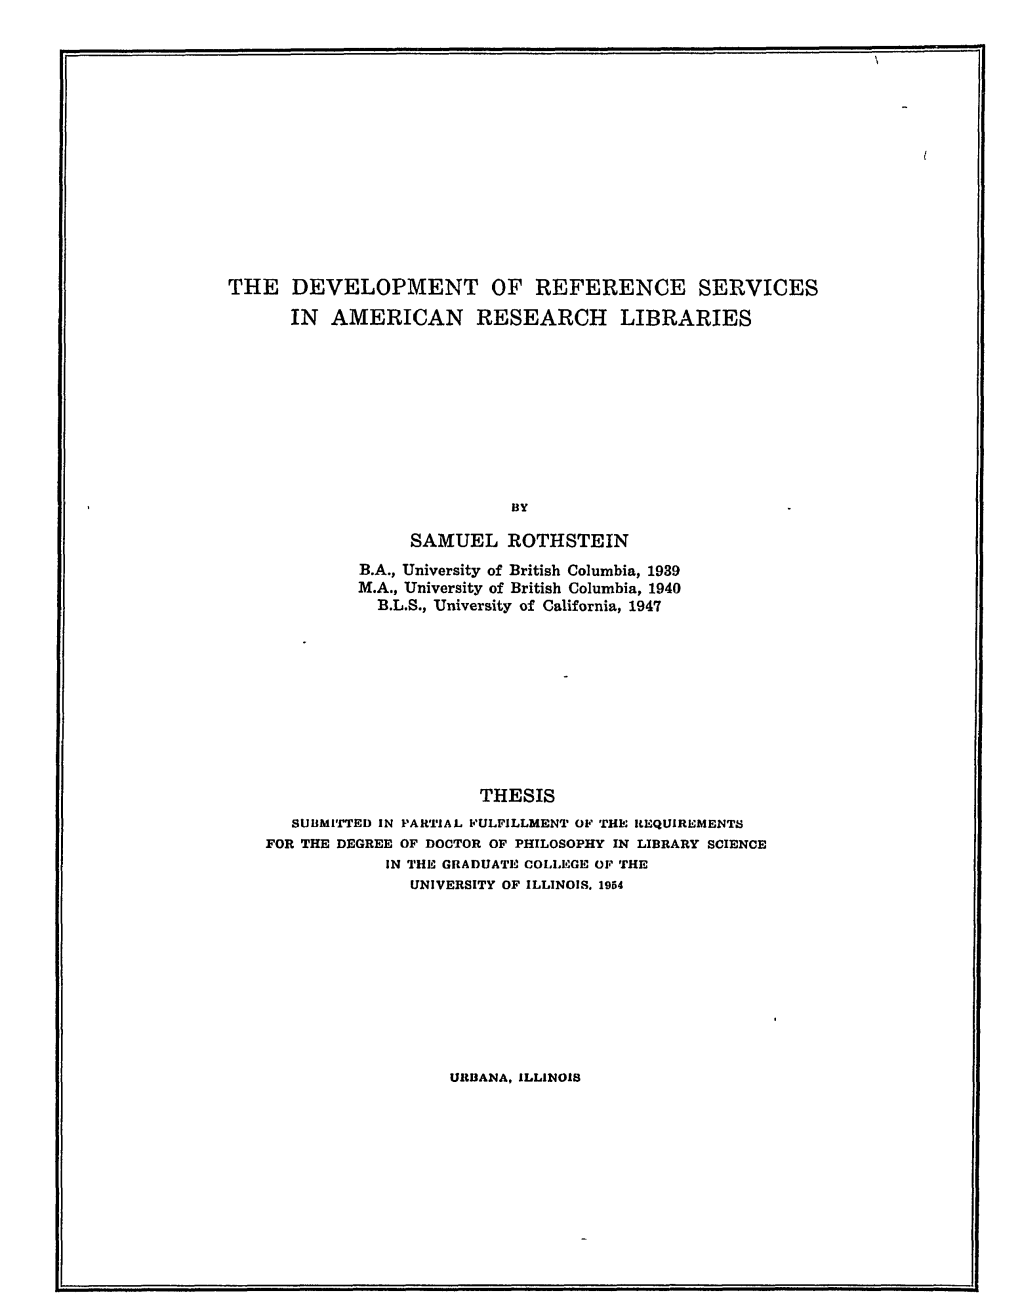 The Development of Reference Services in American Research Libraries